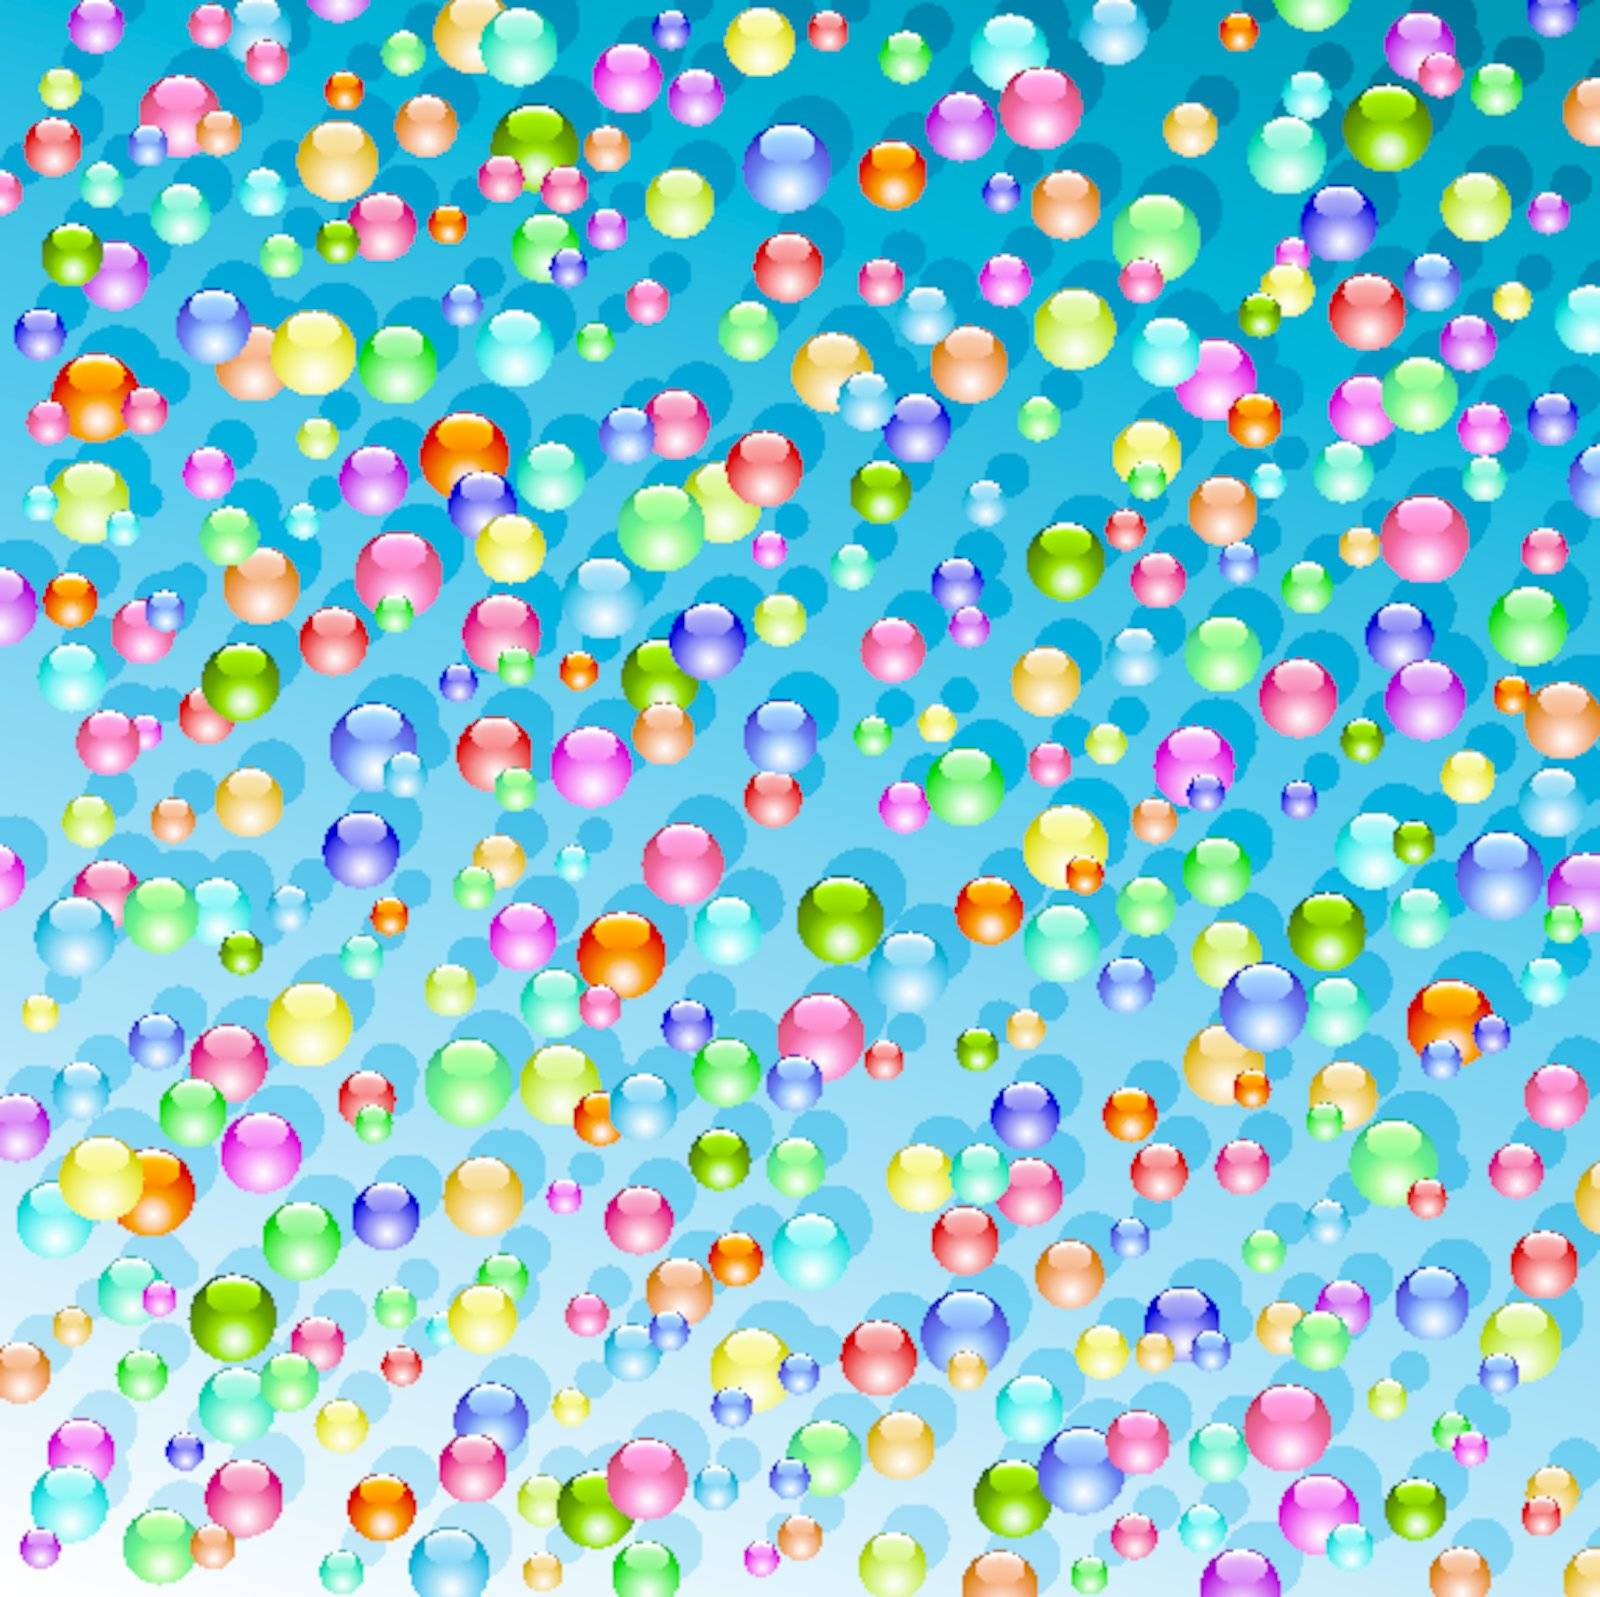 vector background of shiny bubbles